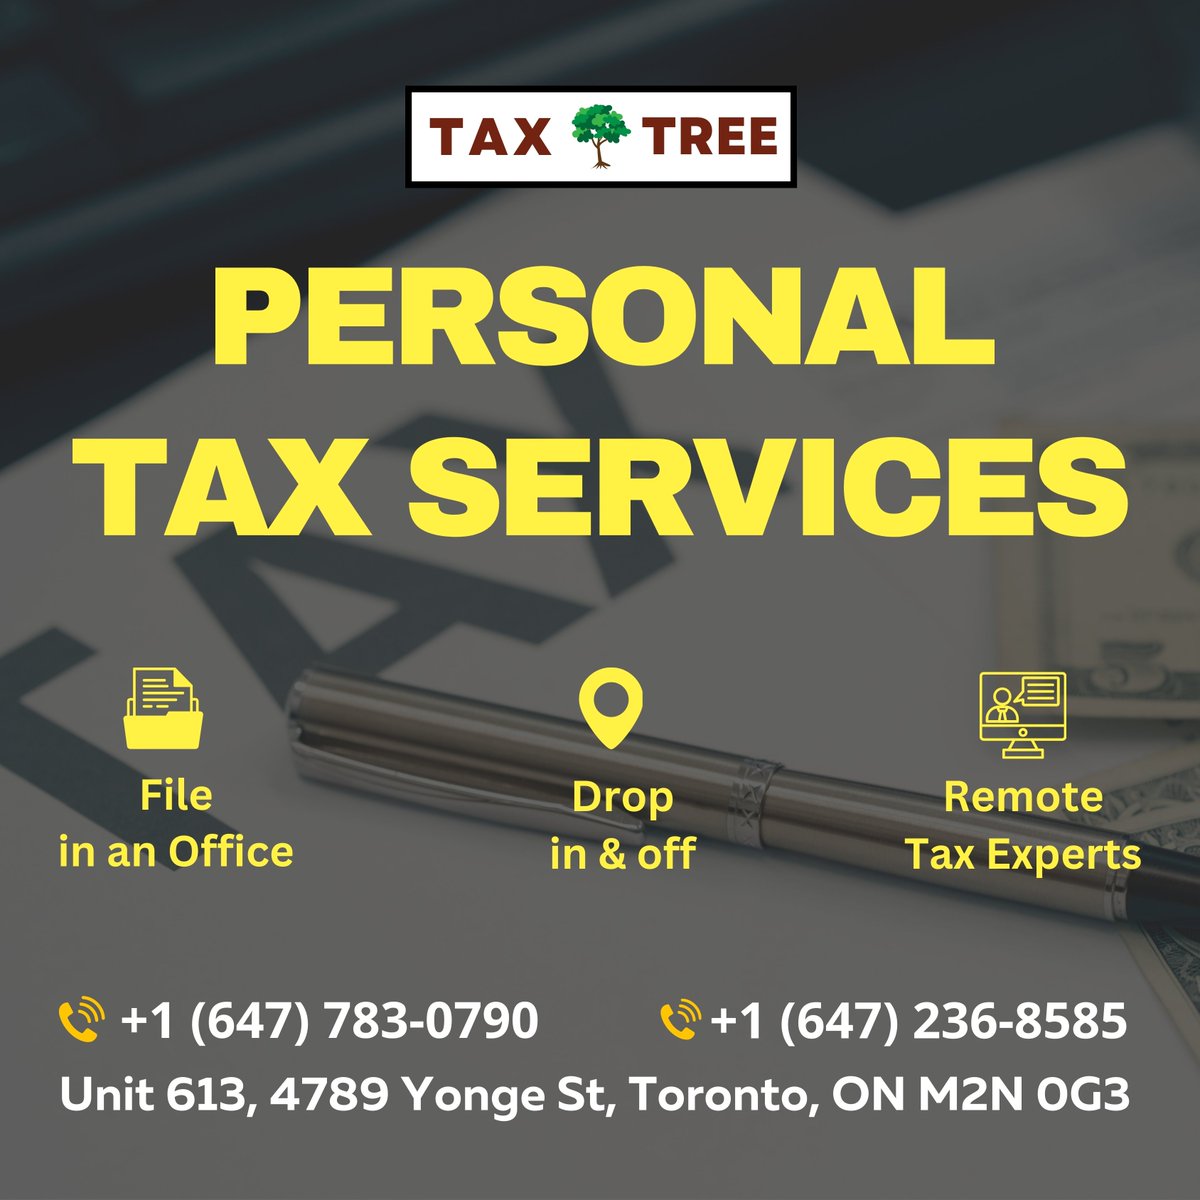 Are You Looking for Personal Tax Services?
Call - +1 (647)236-8585
Call - +1 (647)783-0790
....
........

#taxaccounting #tax #taxservices #taxconsultancy #accountingtax #taxseason #accounting #taxreturn #taxhelp #taxadvice #personaltaxes #smallbusinesstaxes #personaltaxes